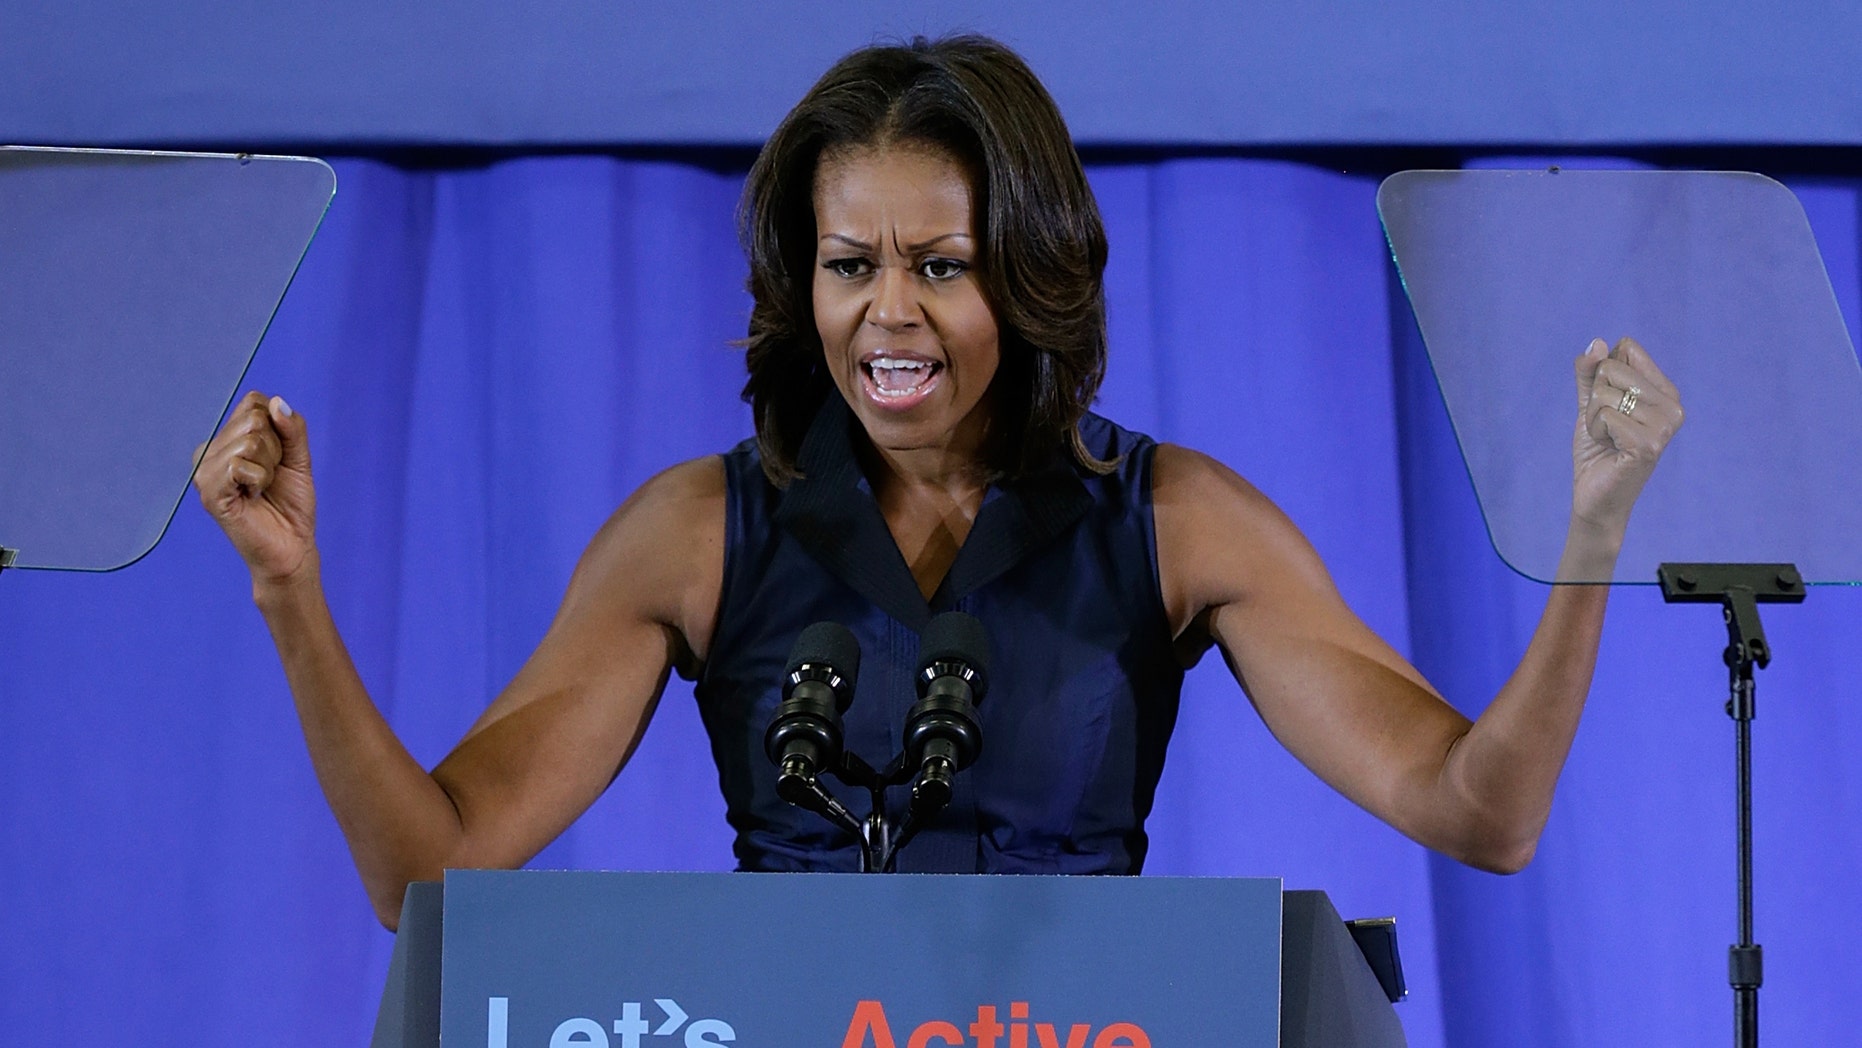 michelle obama get moving